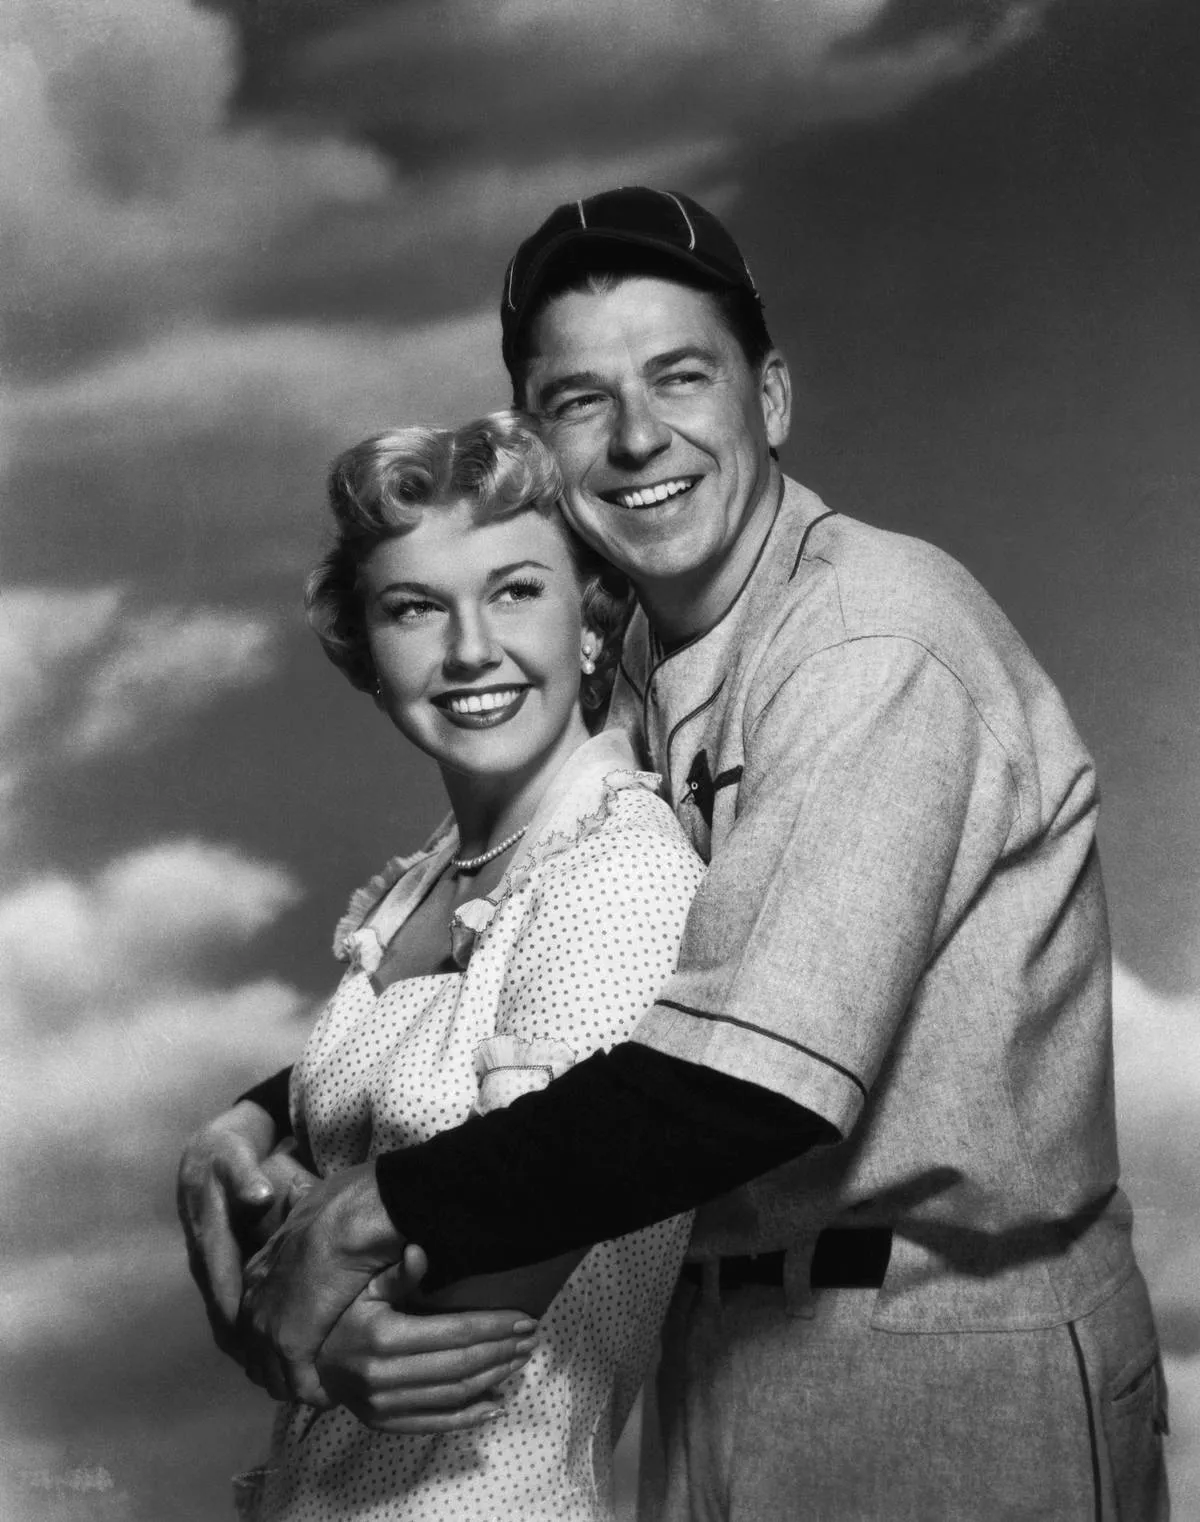 Ronald Reagan and Doris Day team up in the1952 movie, The Winning Team.